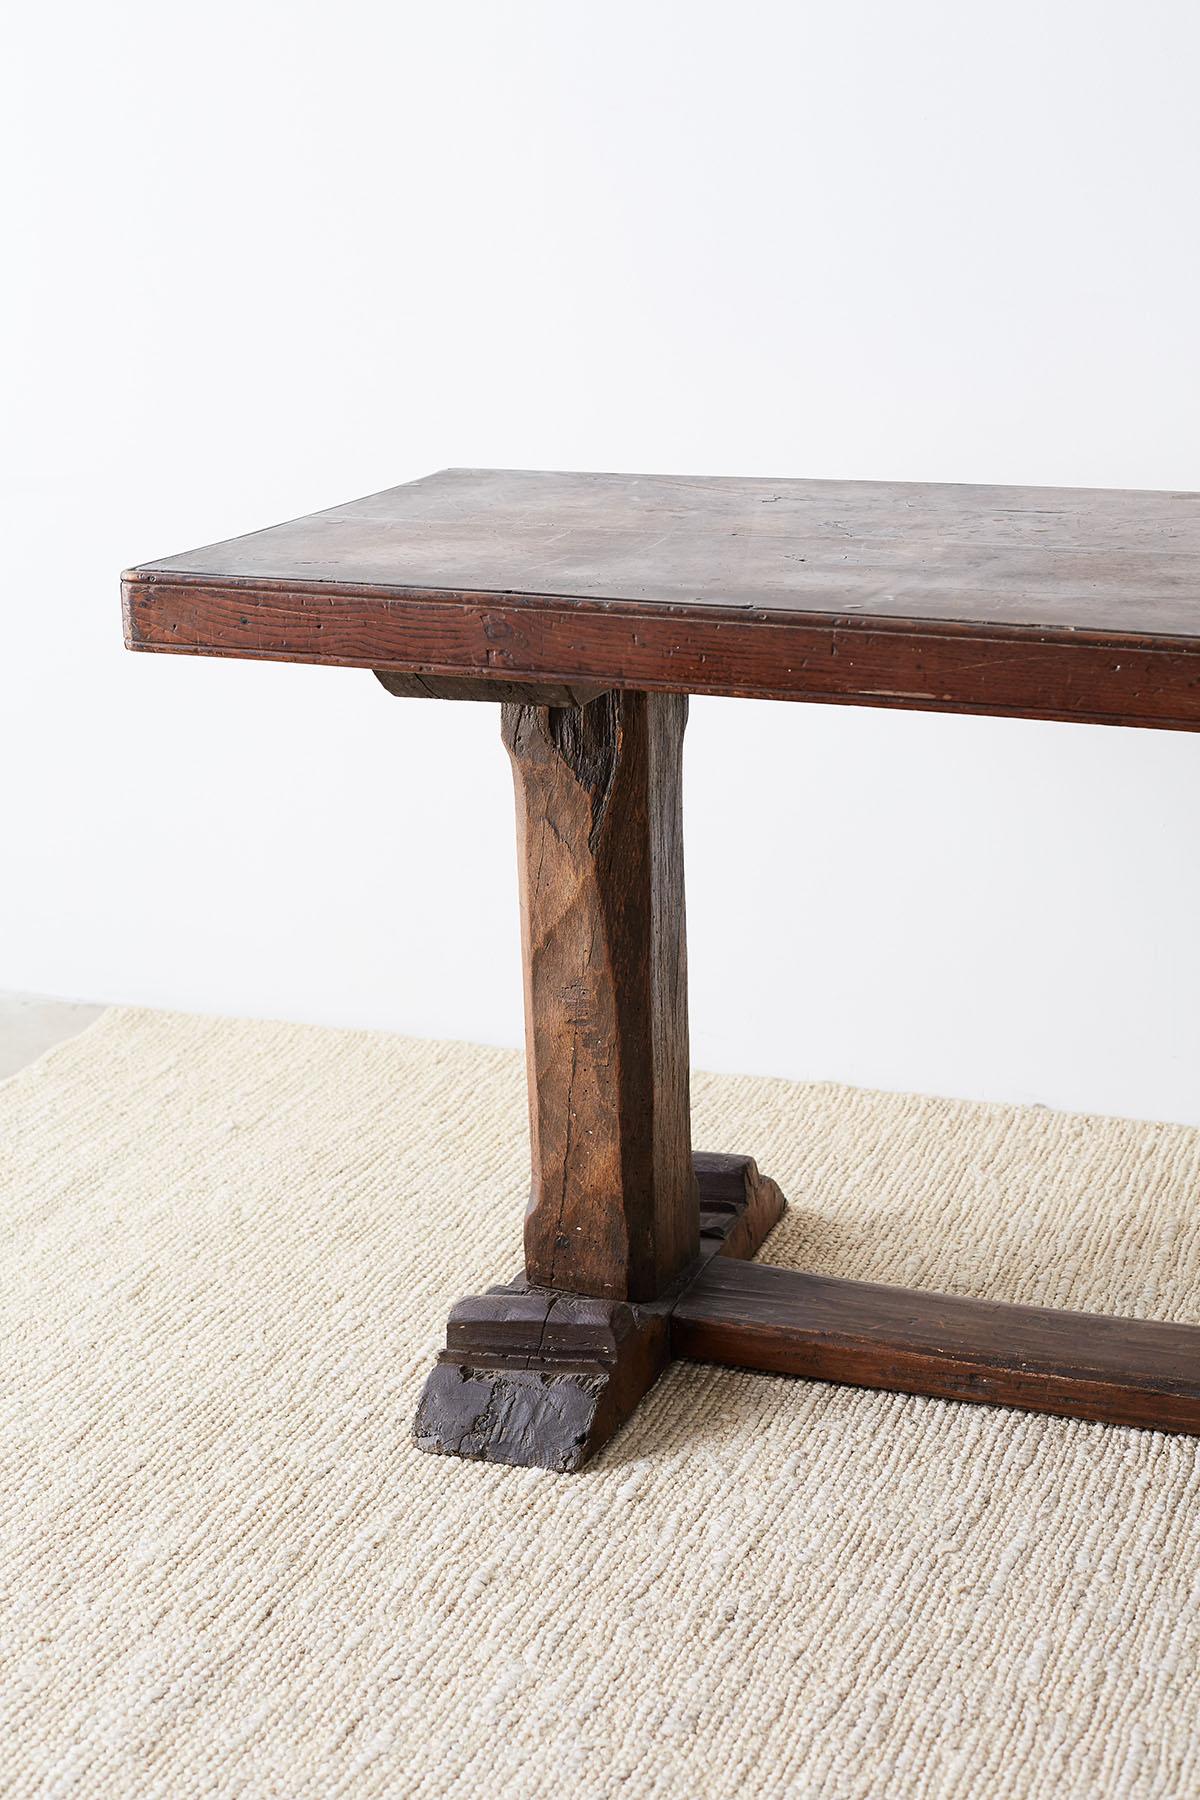 Hand-Crafted Rustic Italian Baroque Refectory Trestle Table